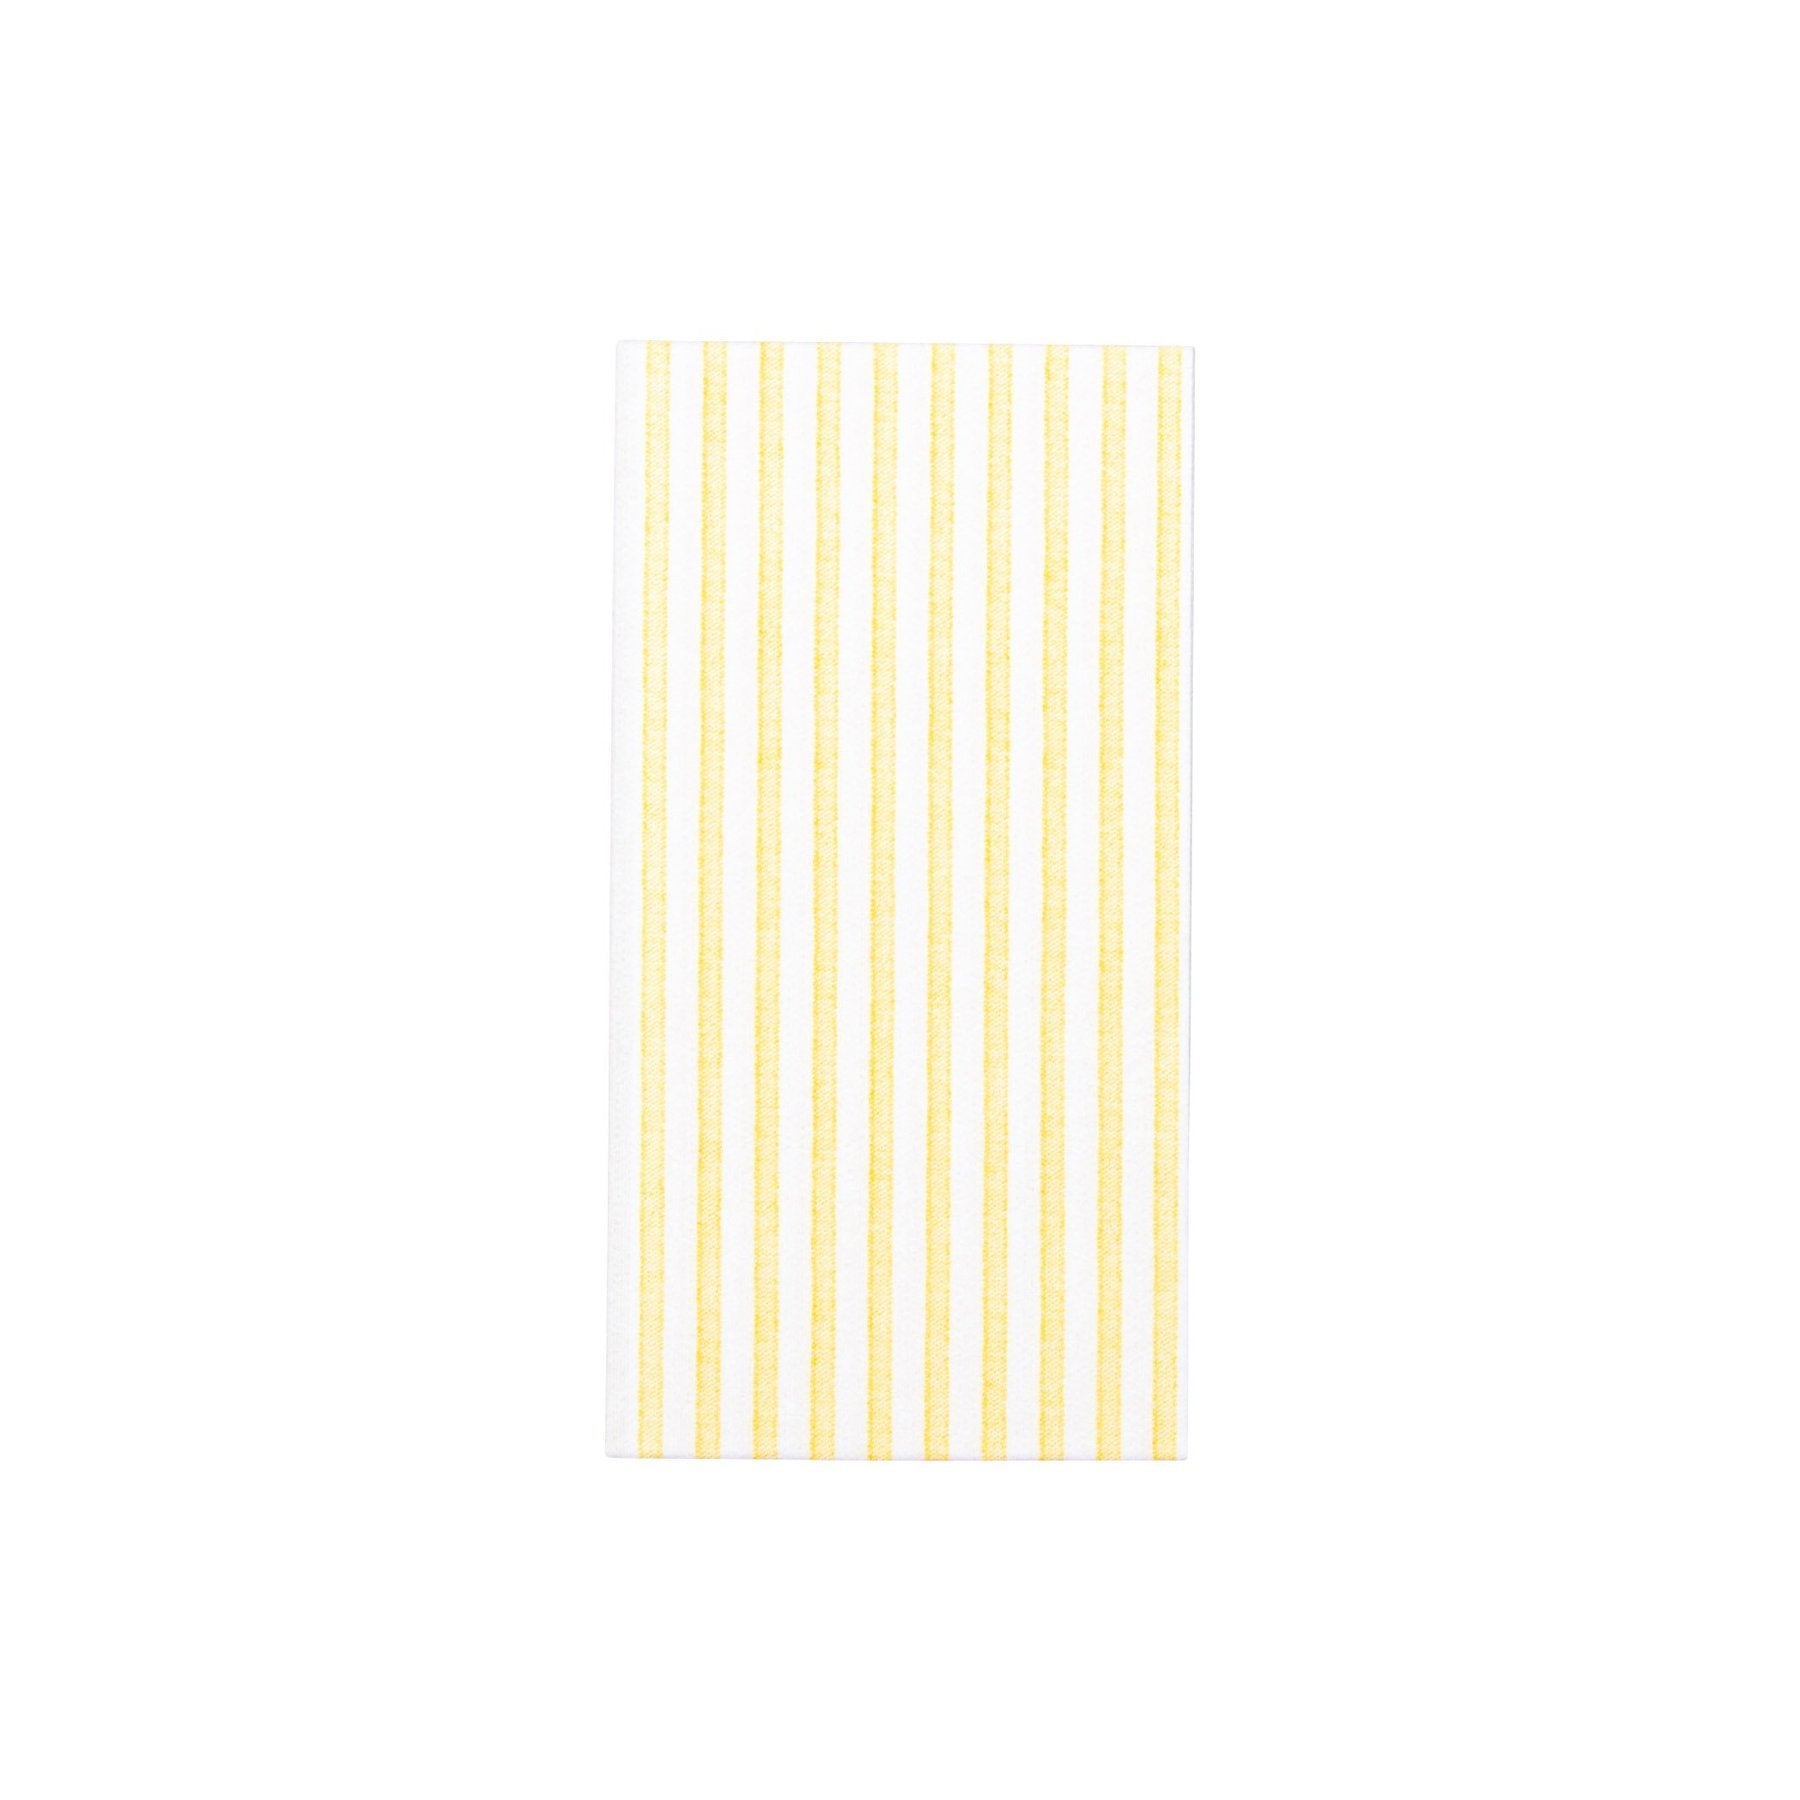 Papersoft Napkins Capri Yellow Guest Towels - Pack of 20